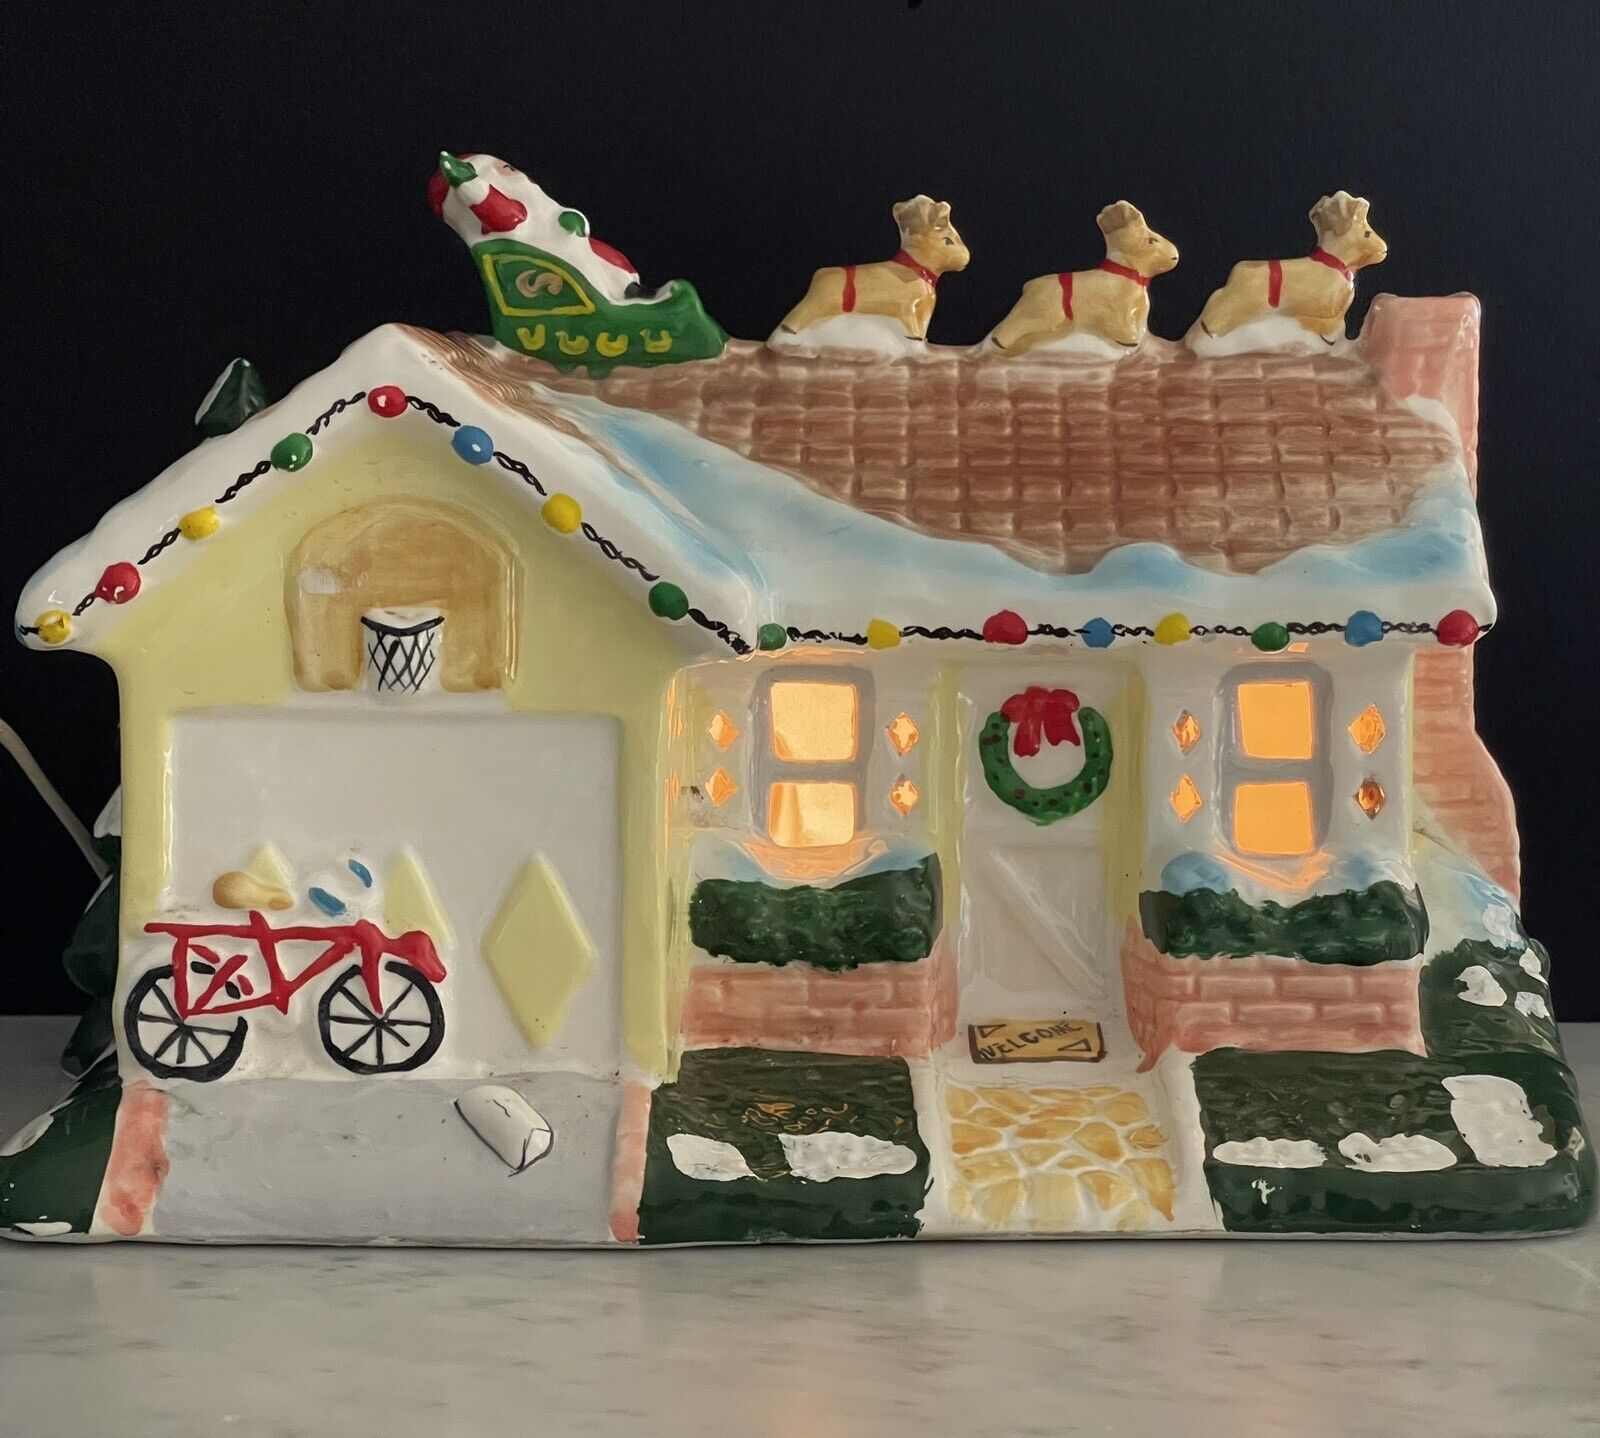 Vintage Large Hand-Painted Ceramic Christmas House w/ Santa's Sleigh on Roof